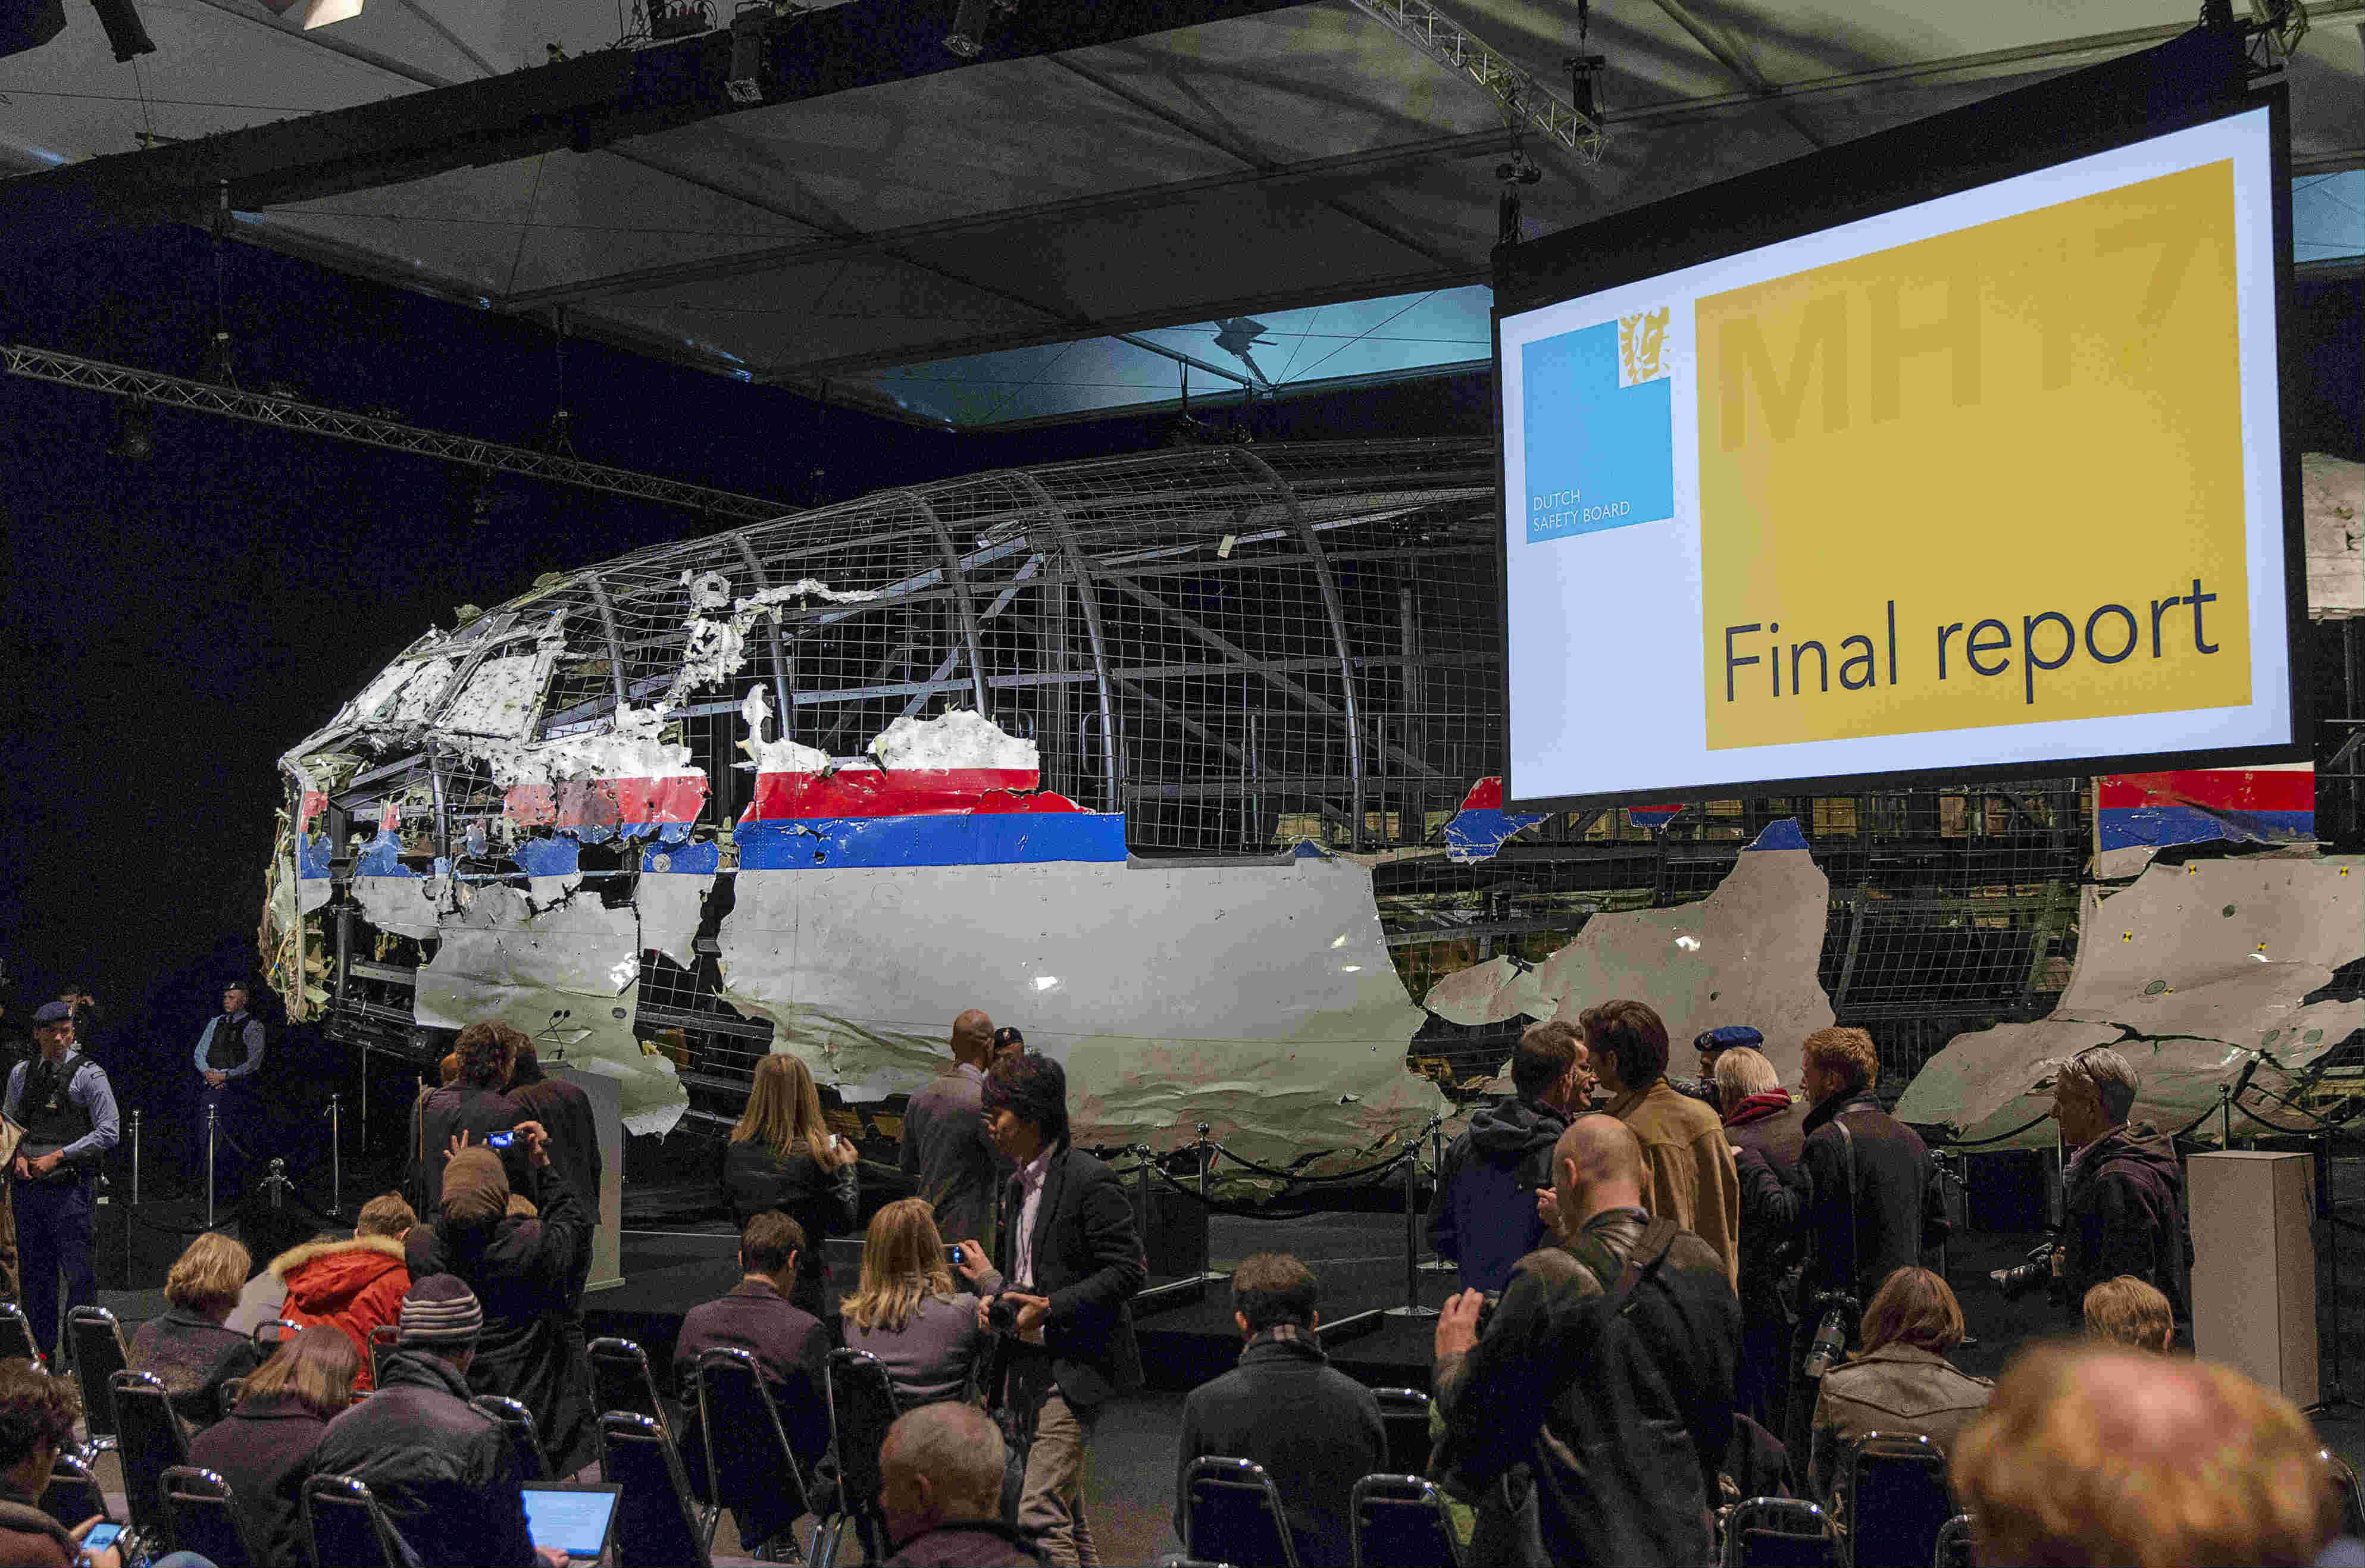 The reconstructed airplane serves as a backdrop during the presentation of the final report into the crash of July 2014 of Malaysia Airlines flight MH17 over Ukraine, in Gilze Rijen, the Netherlands, October 13, 2015. REUTERS/Michael Kooren